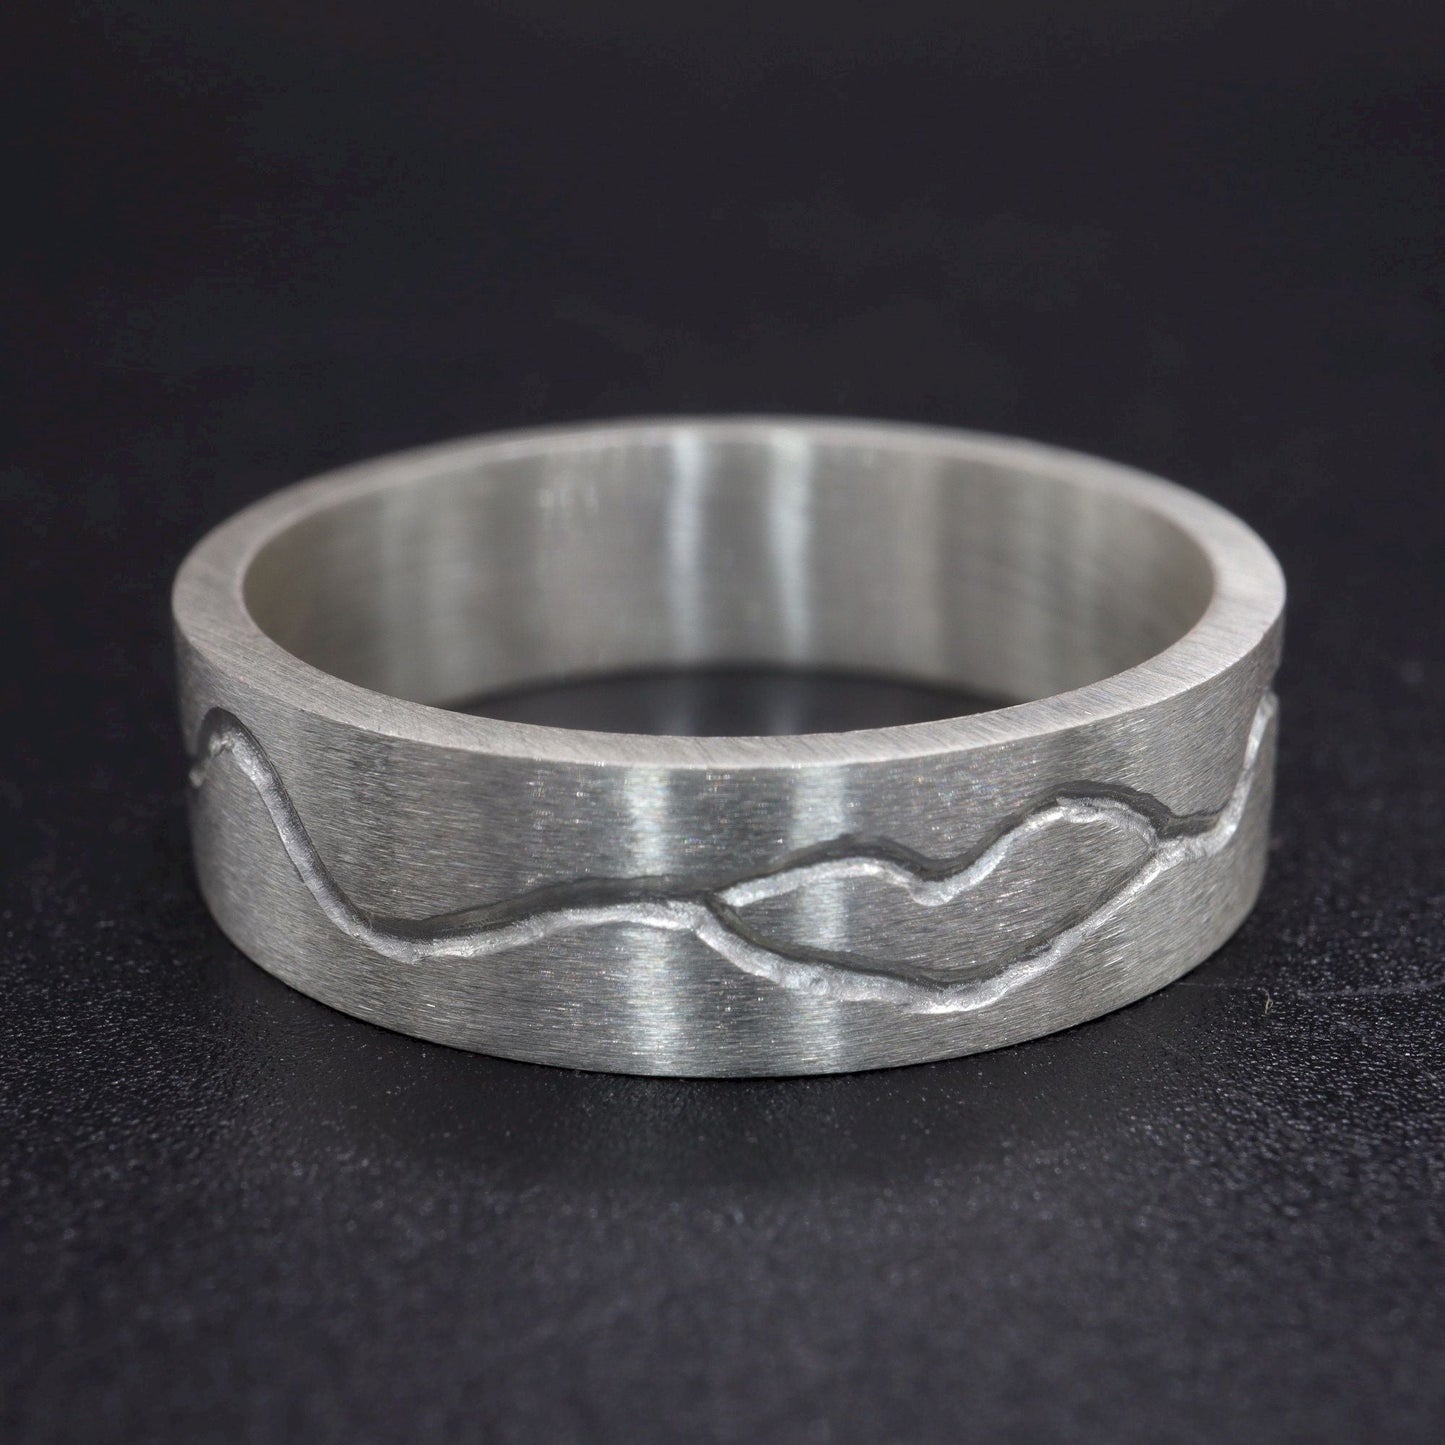 Commitment, Promise, Engagement mens ring - flat carved textured band - Water Beck design.